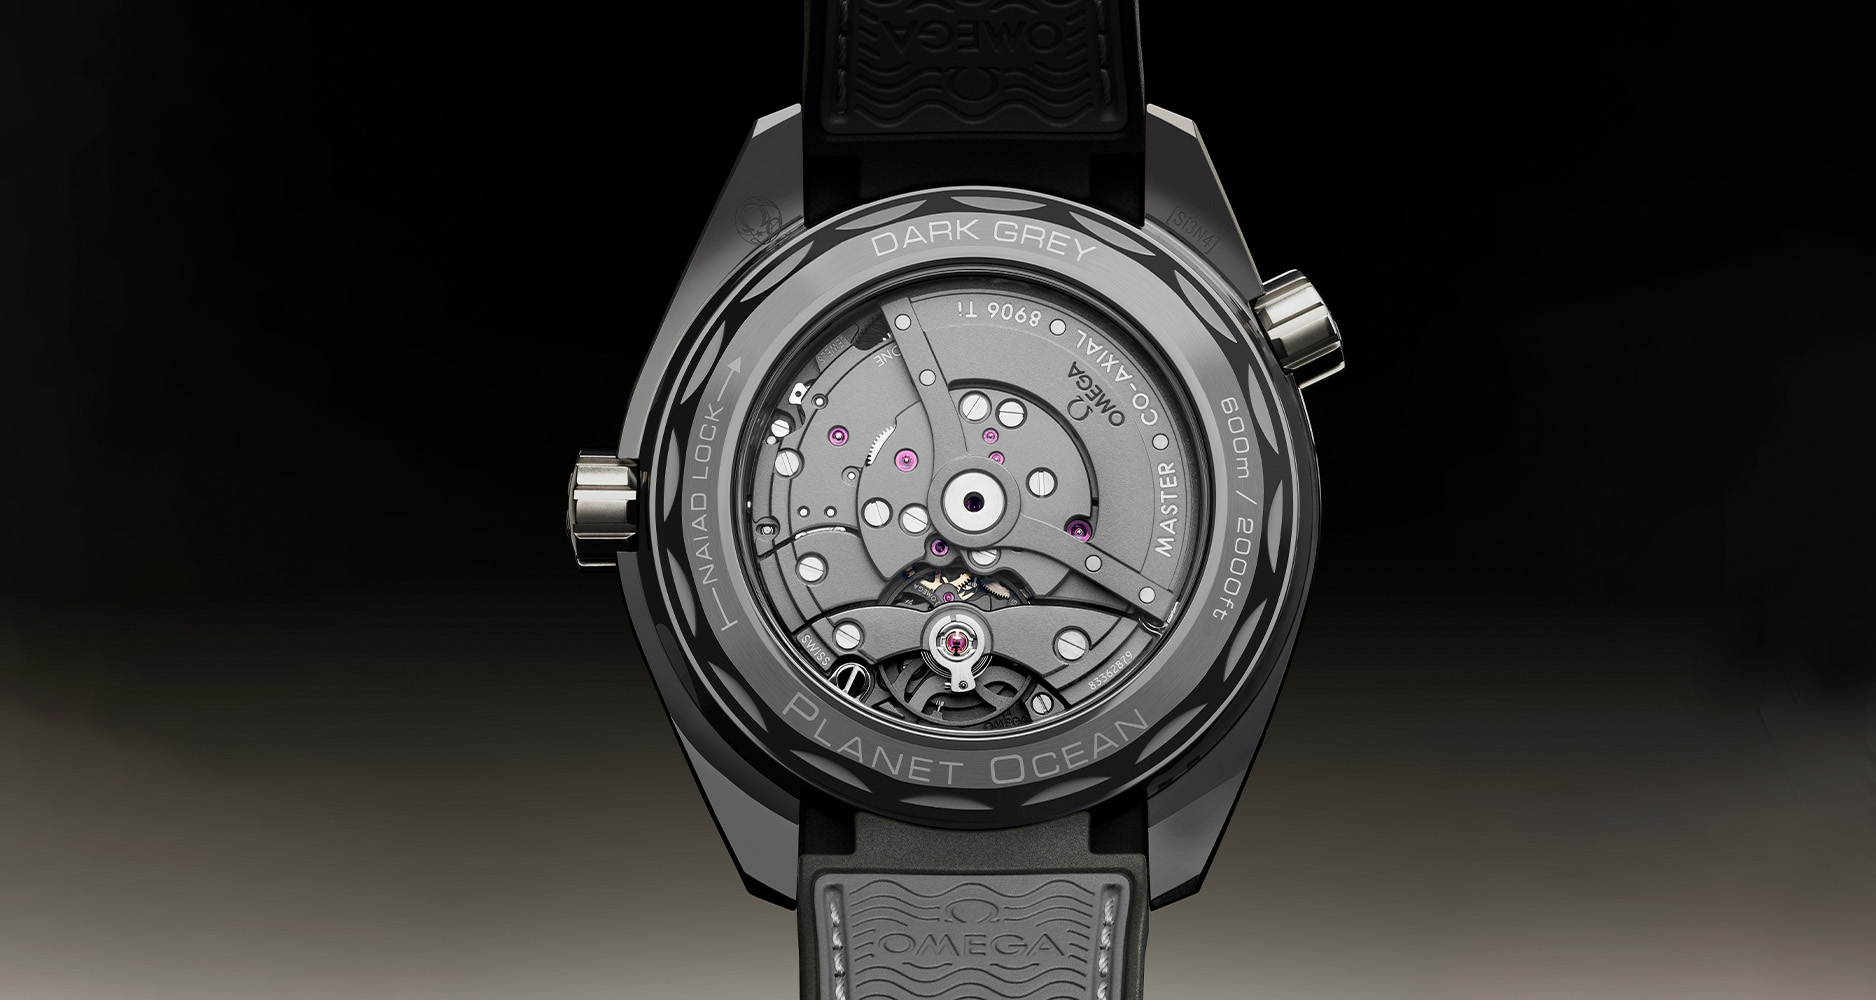 The caseback of the Omega Seamaster Planet Ocean GMT 'Dark Grey' has a monochromatic look that's just right.